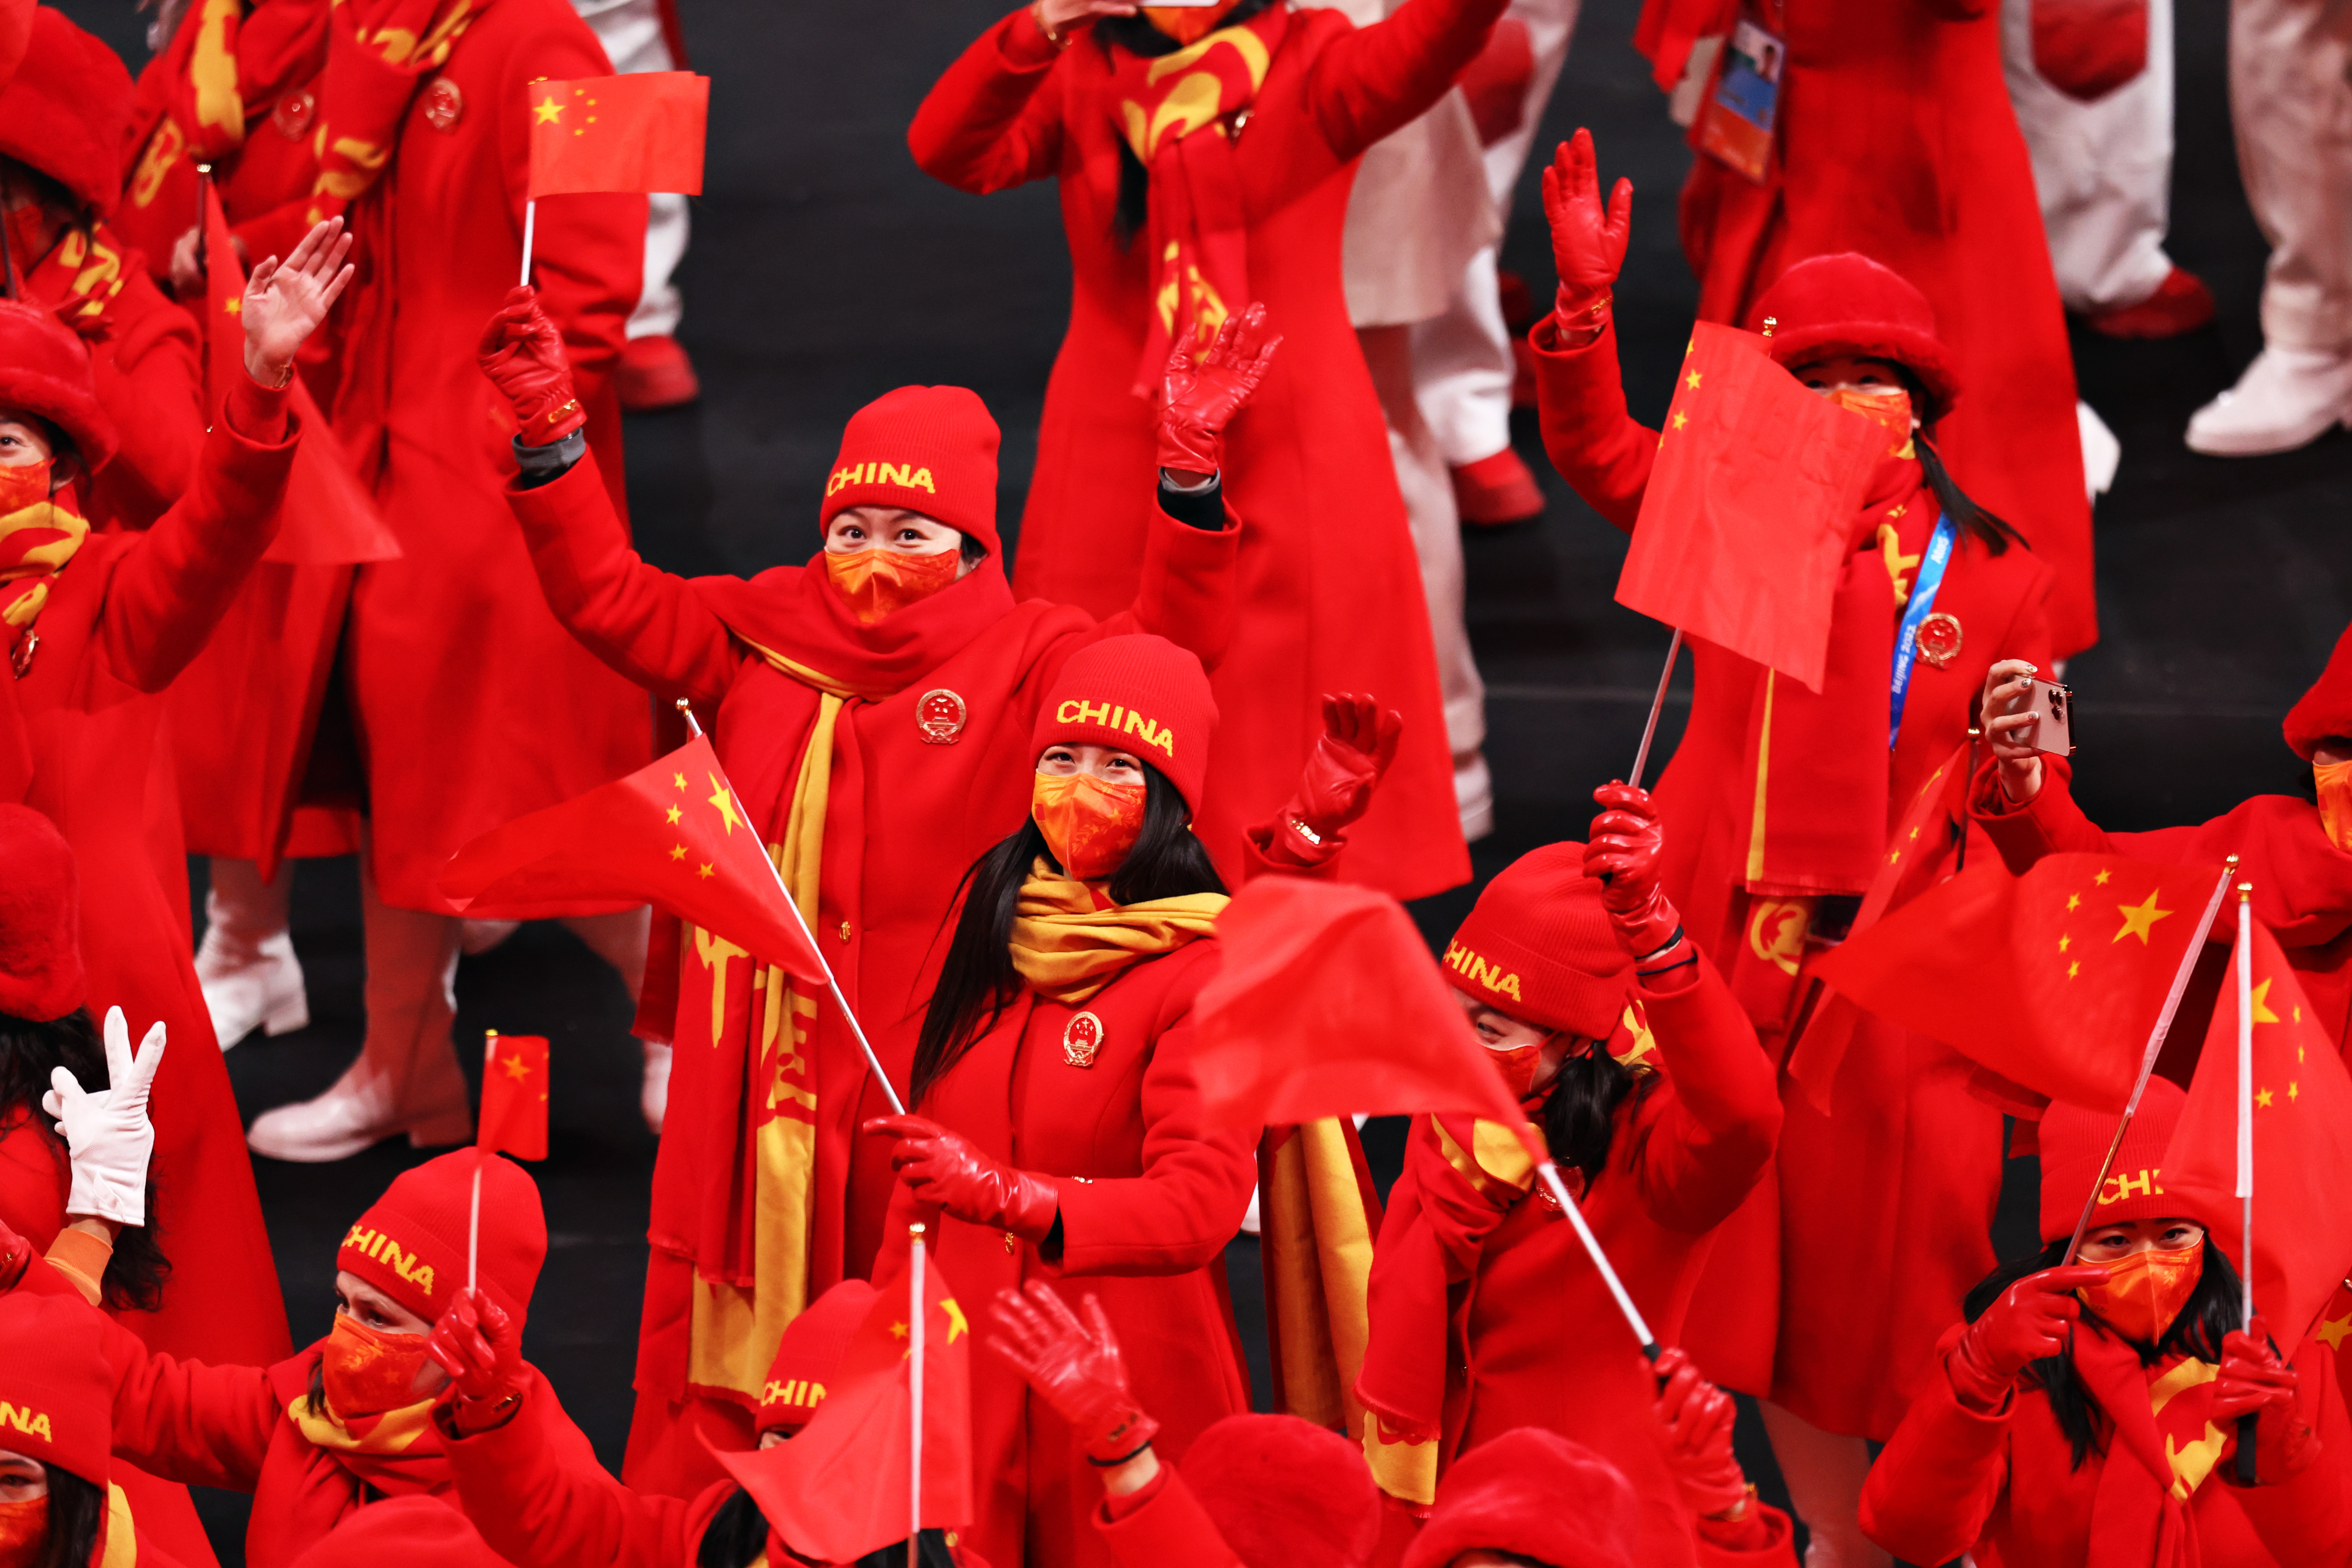 Members of Team China wave flags during the Opening Ceremony of the Beijing 2022 Winter Olympics at the Beijing National Stadium on February 04 in Beijing, China.